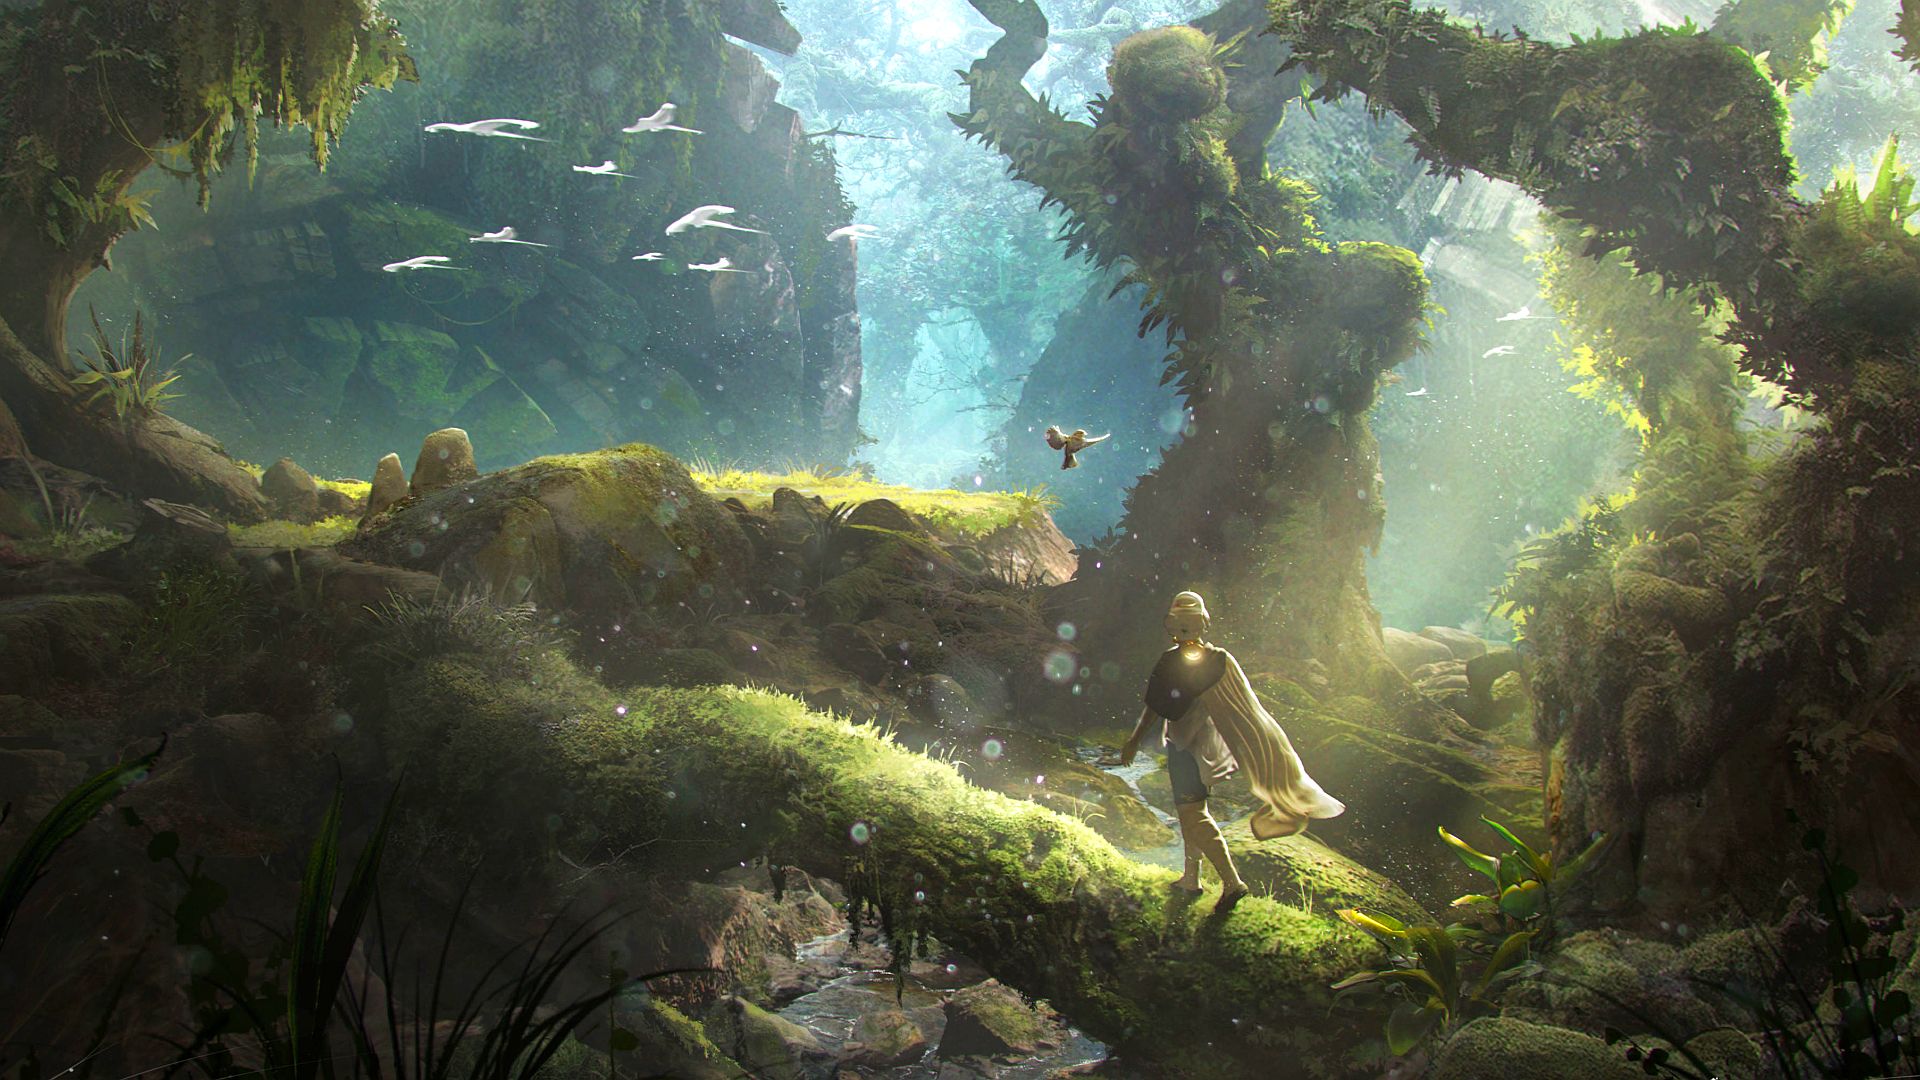 Soulframe art: Soulframe's protagonist walks along a moss-covered fallen tree trunk in a lush forest, marvelling a large tree to their right as shafts of light pierce the canopy. The sparrow that accompanies the player character in the cinematic trailer orbits their head serenely.